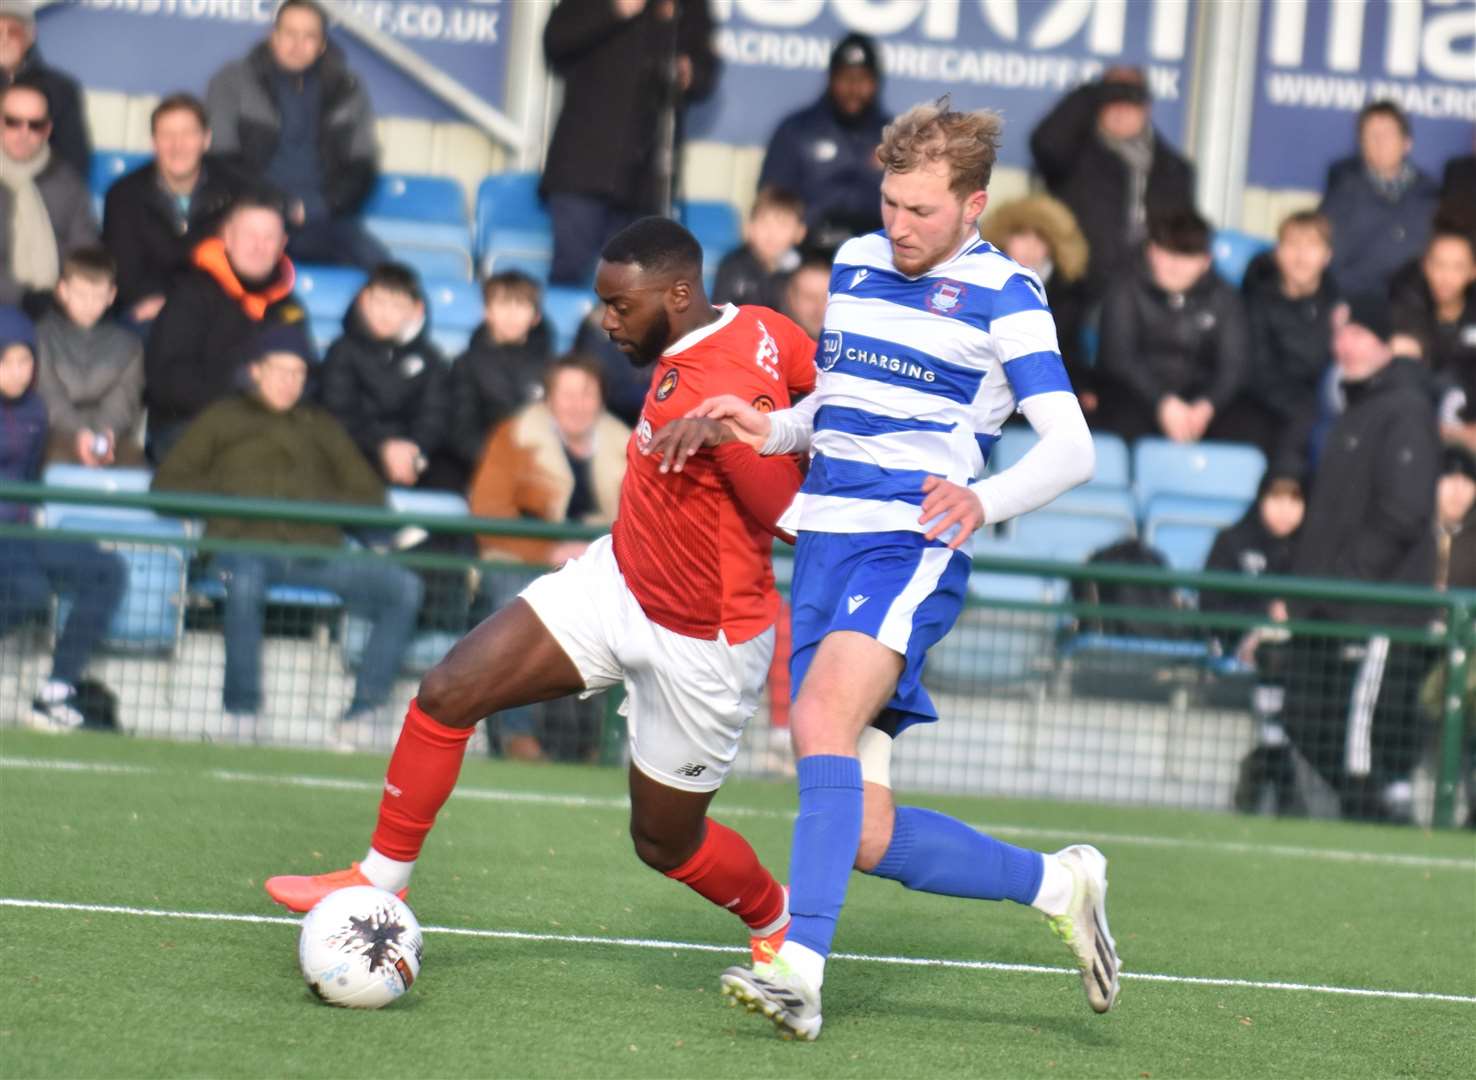 Ebbsfleet’s Omari Sterling-James runs at the Oxford City defence on Saturday. Picture: Ed Miller/EUFC